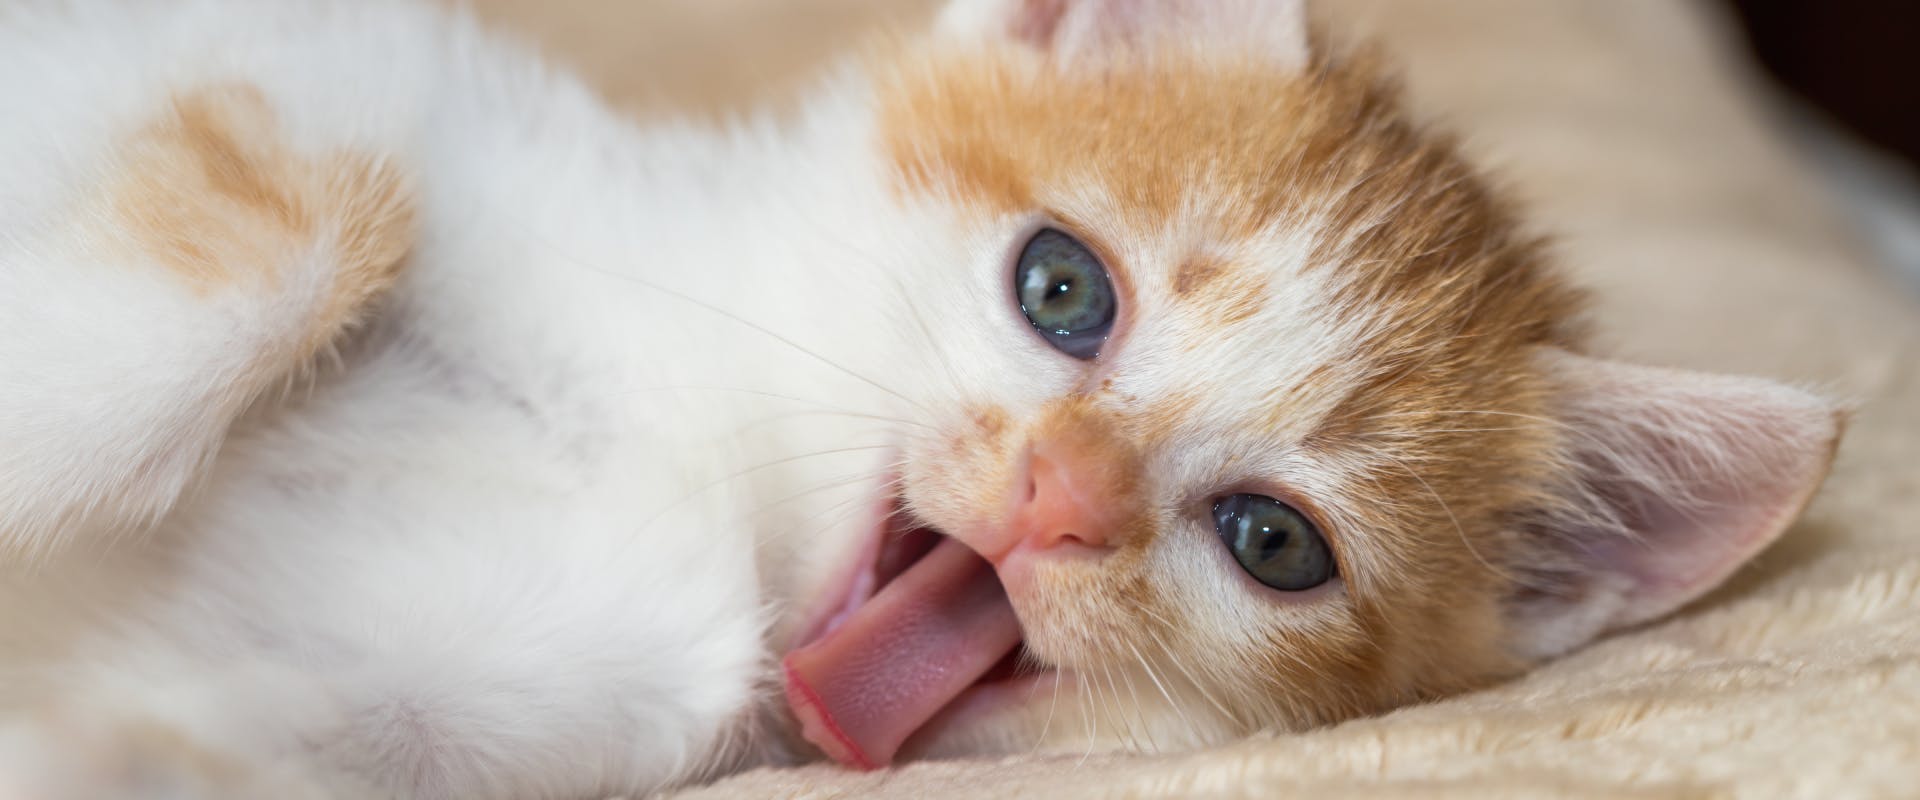 A kitten opens its mouth to show its tongue.